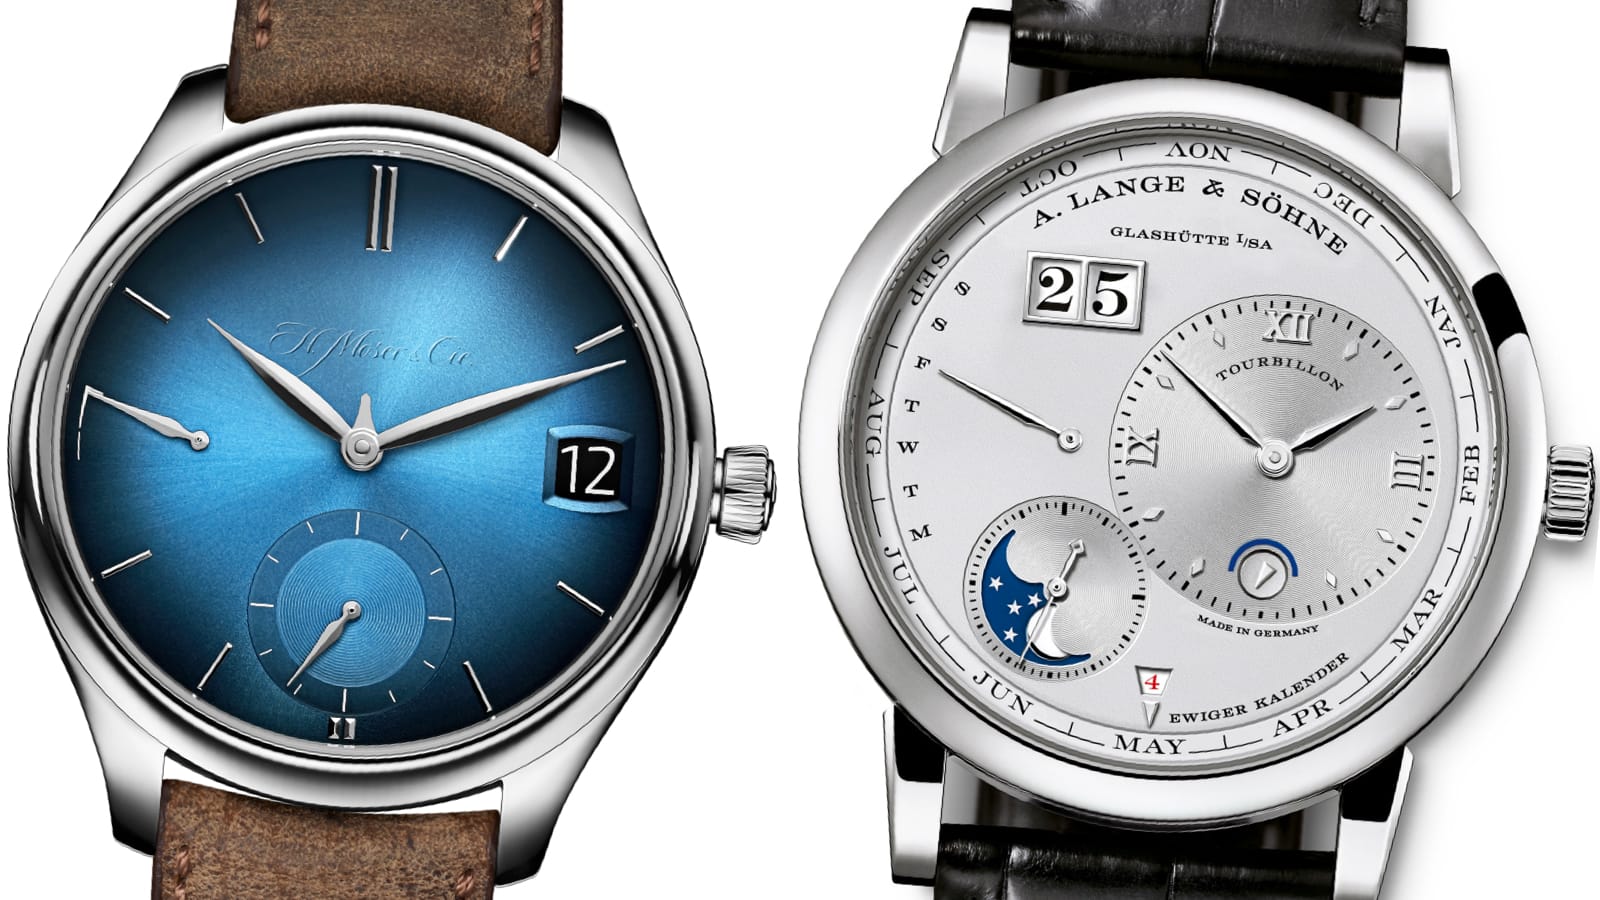 Comparison of the H. Moser & Cie. Endeavour Perpetual Calendar Funky Blue and the A. Lange & Söhne Lange 1 Perptual Calendar